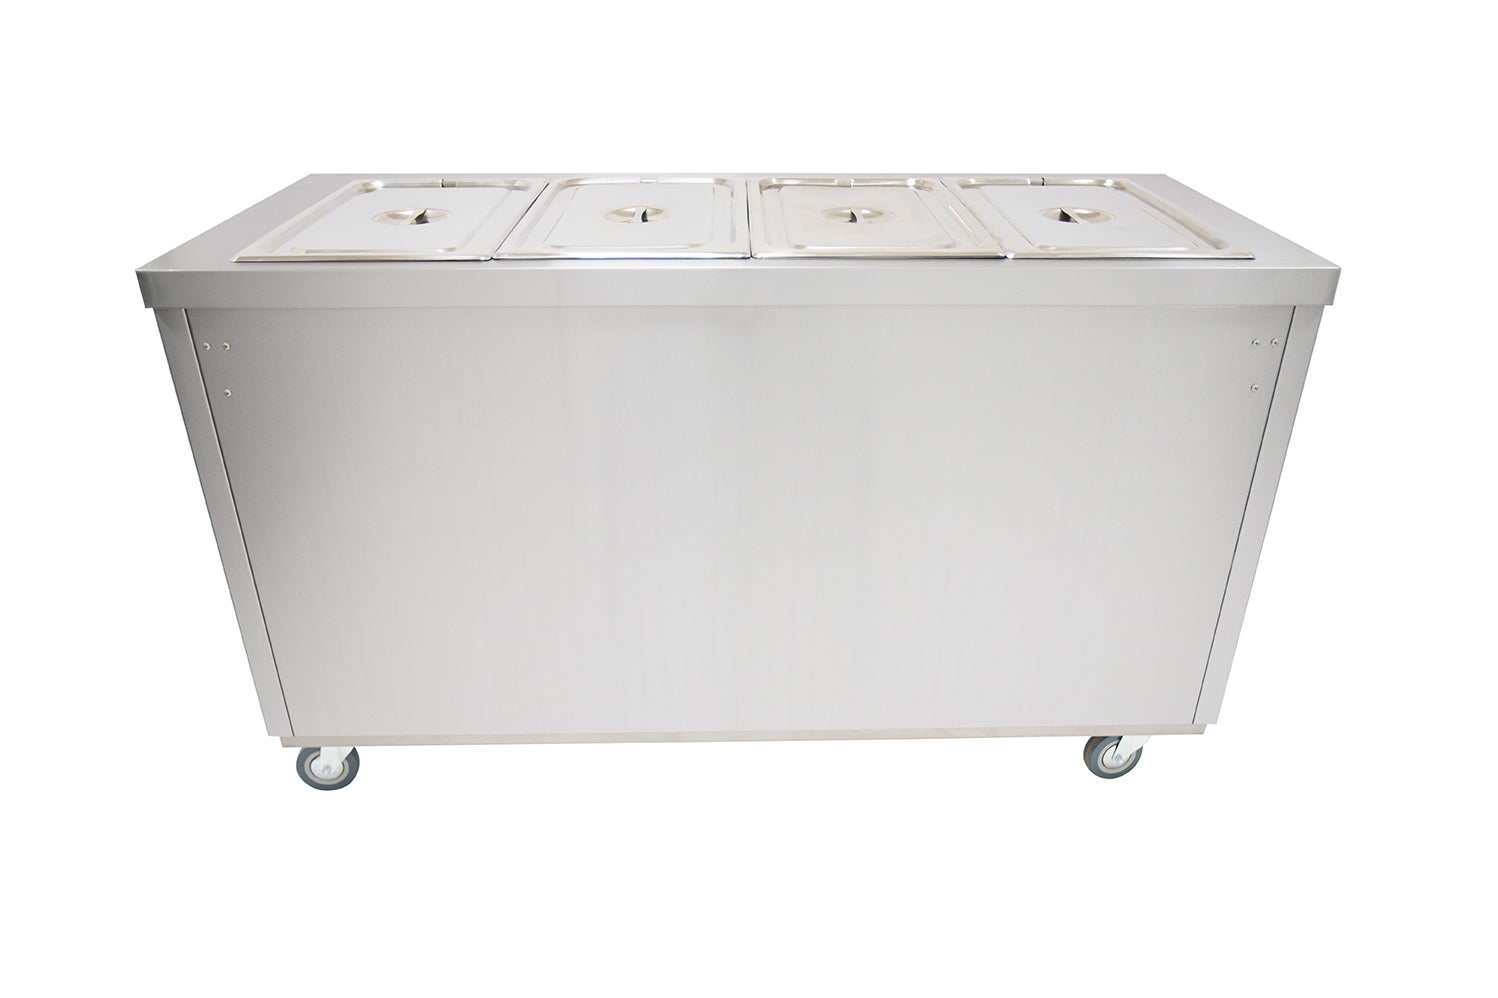 Parry Mobile Bain Marie Hot Cupboard HOT15BM rear view